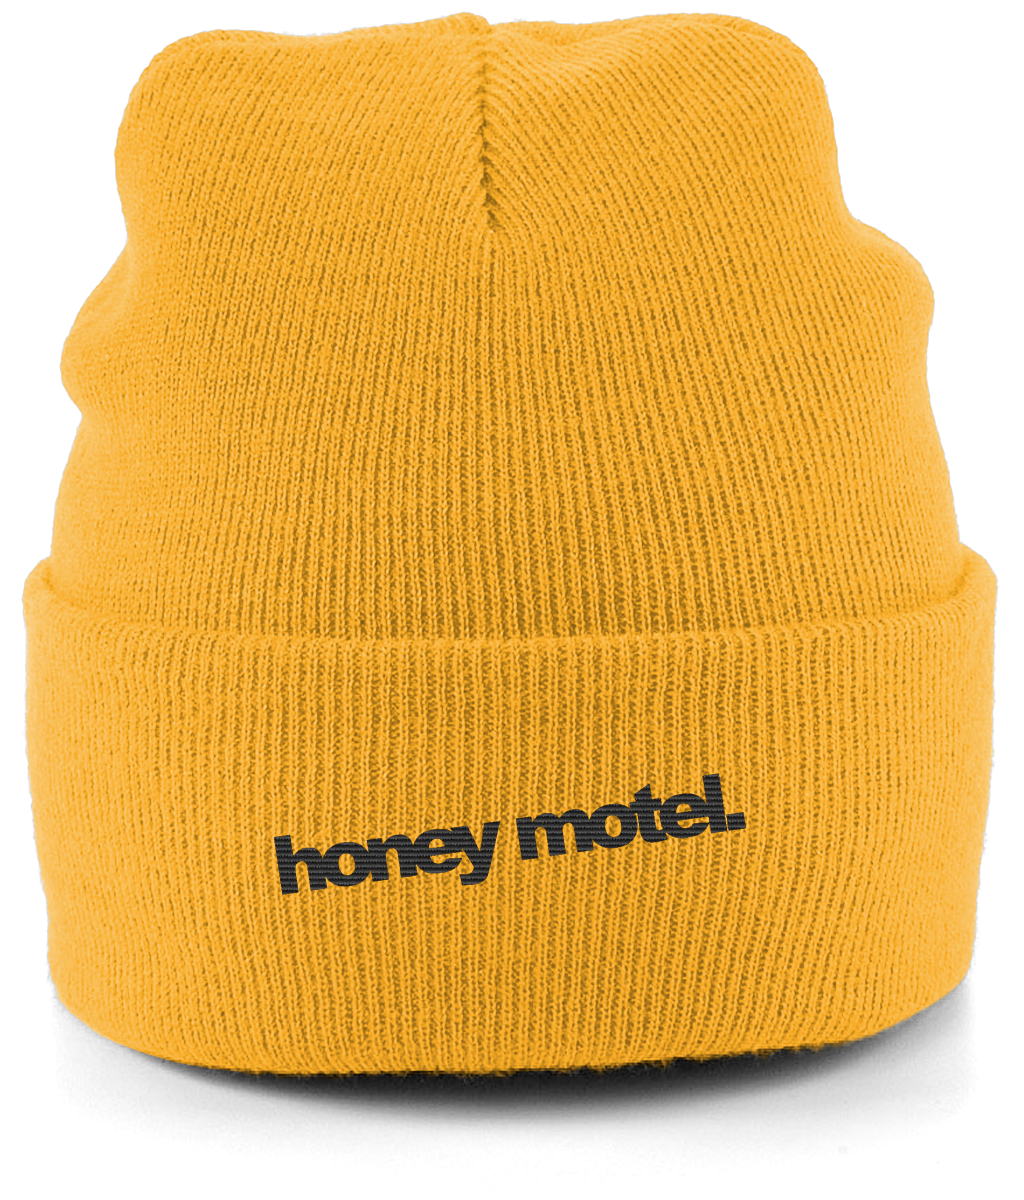 embroidered logo beanie - gold.